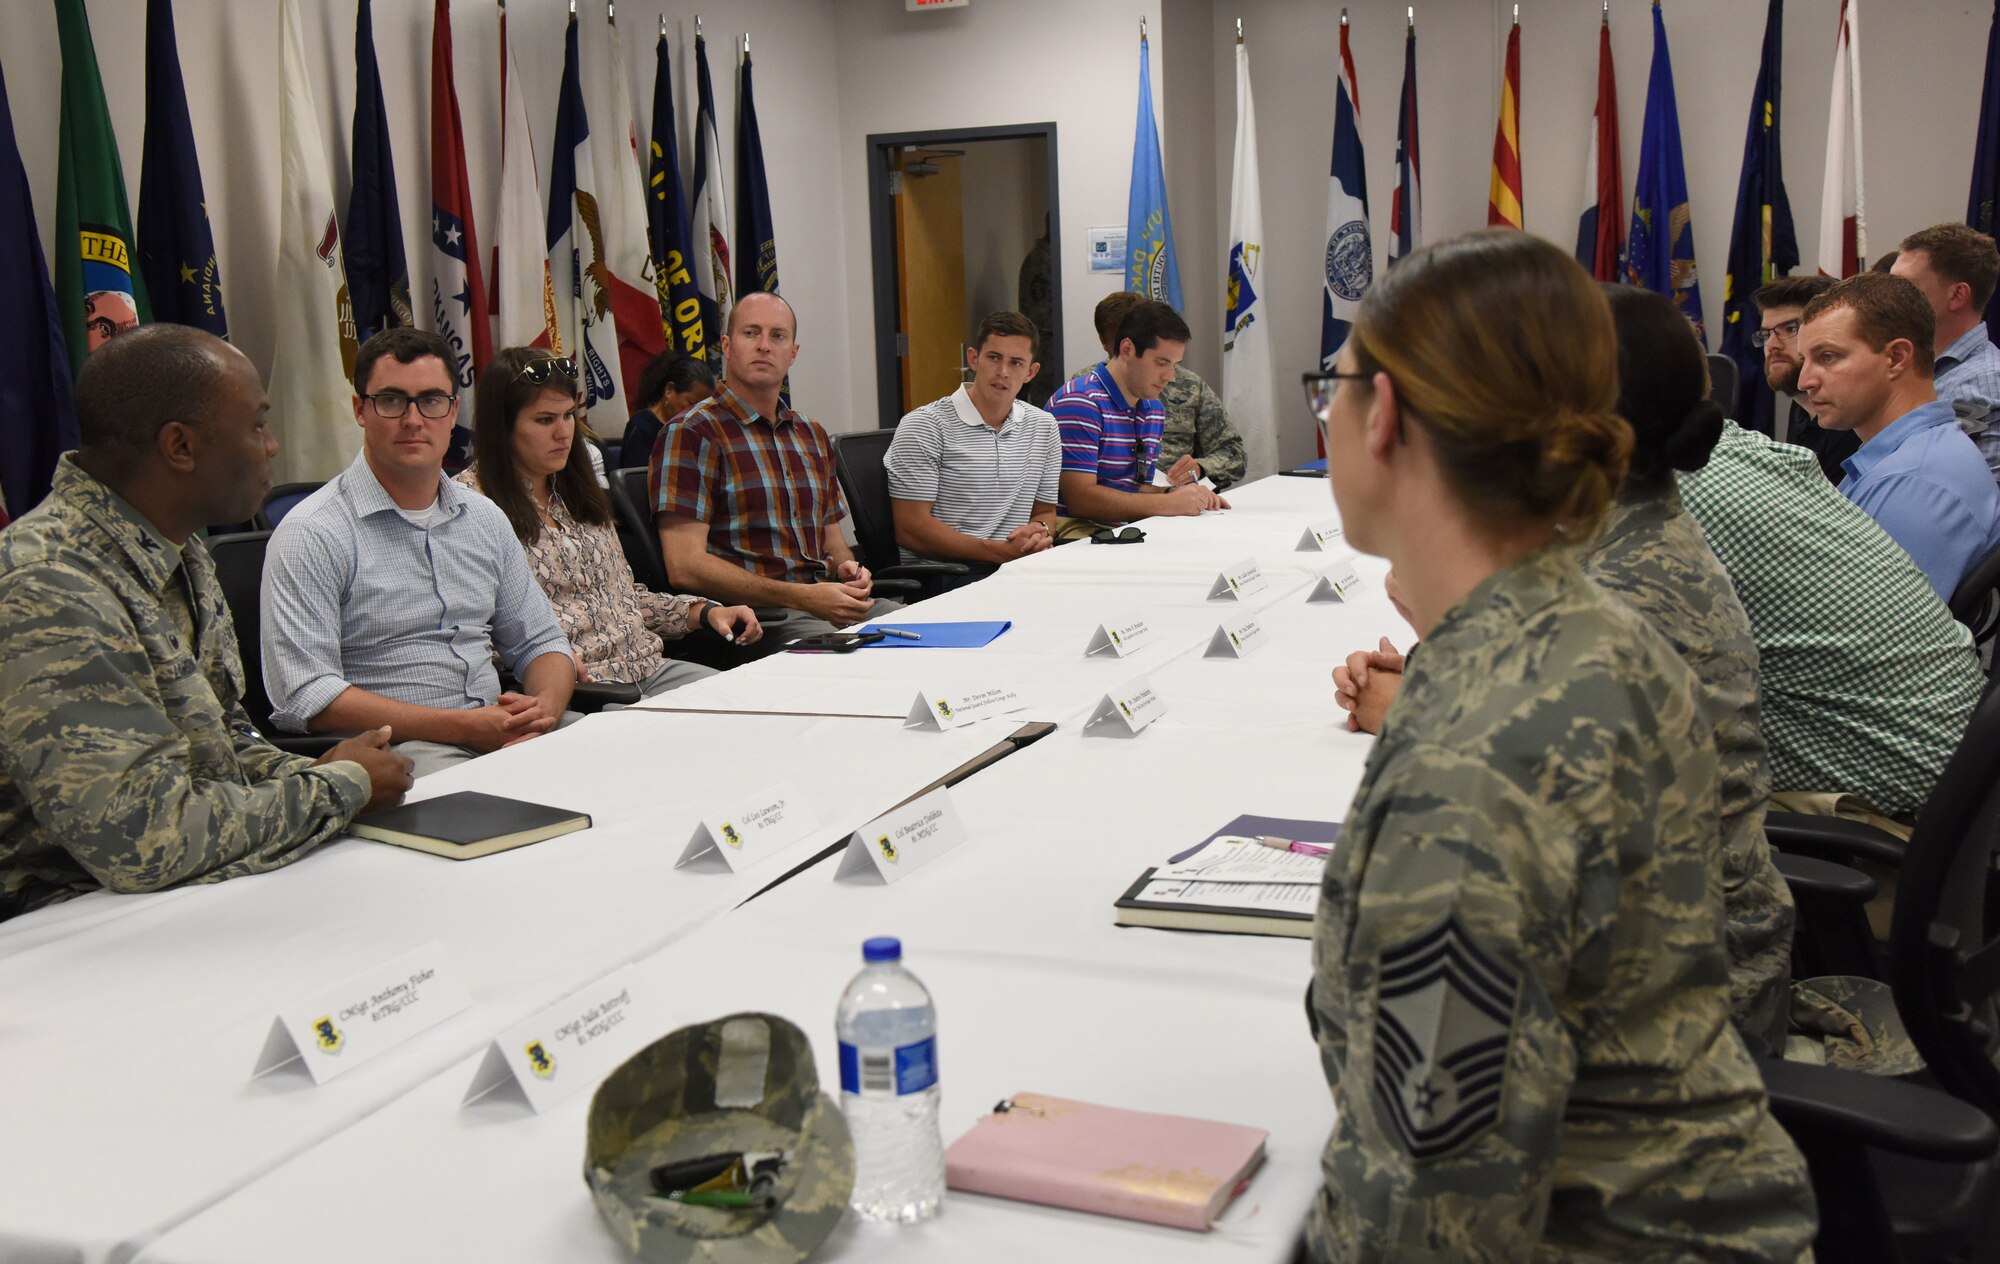 U.S. Air Force Col. Leo Lawson, Jr., 81st Training Group commander, briefs congressional staffers on training innovation projects at the Levitow Training Support Facility on Keesler Air Force Base, Mississippi, Aug. 6, 2018. The staffers visited Keesler from the offices of Senators Roger Wicker and Cindy Hyde-Smith and Congressman Trent Kelly to receive an overview of the 81st Training Wing to identify areas which could use congressional support. (U.S. Air Force photo by Kemberly Groue)